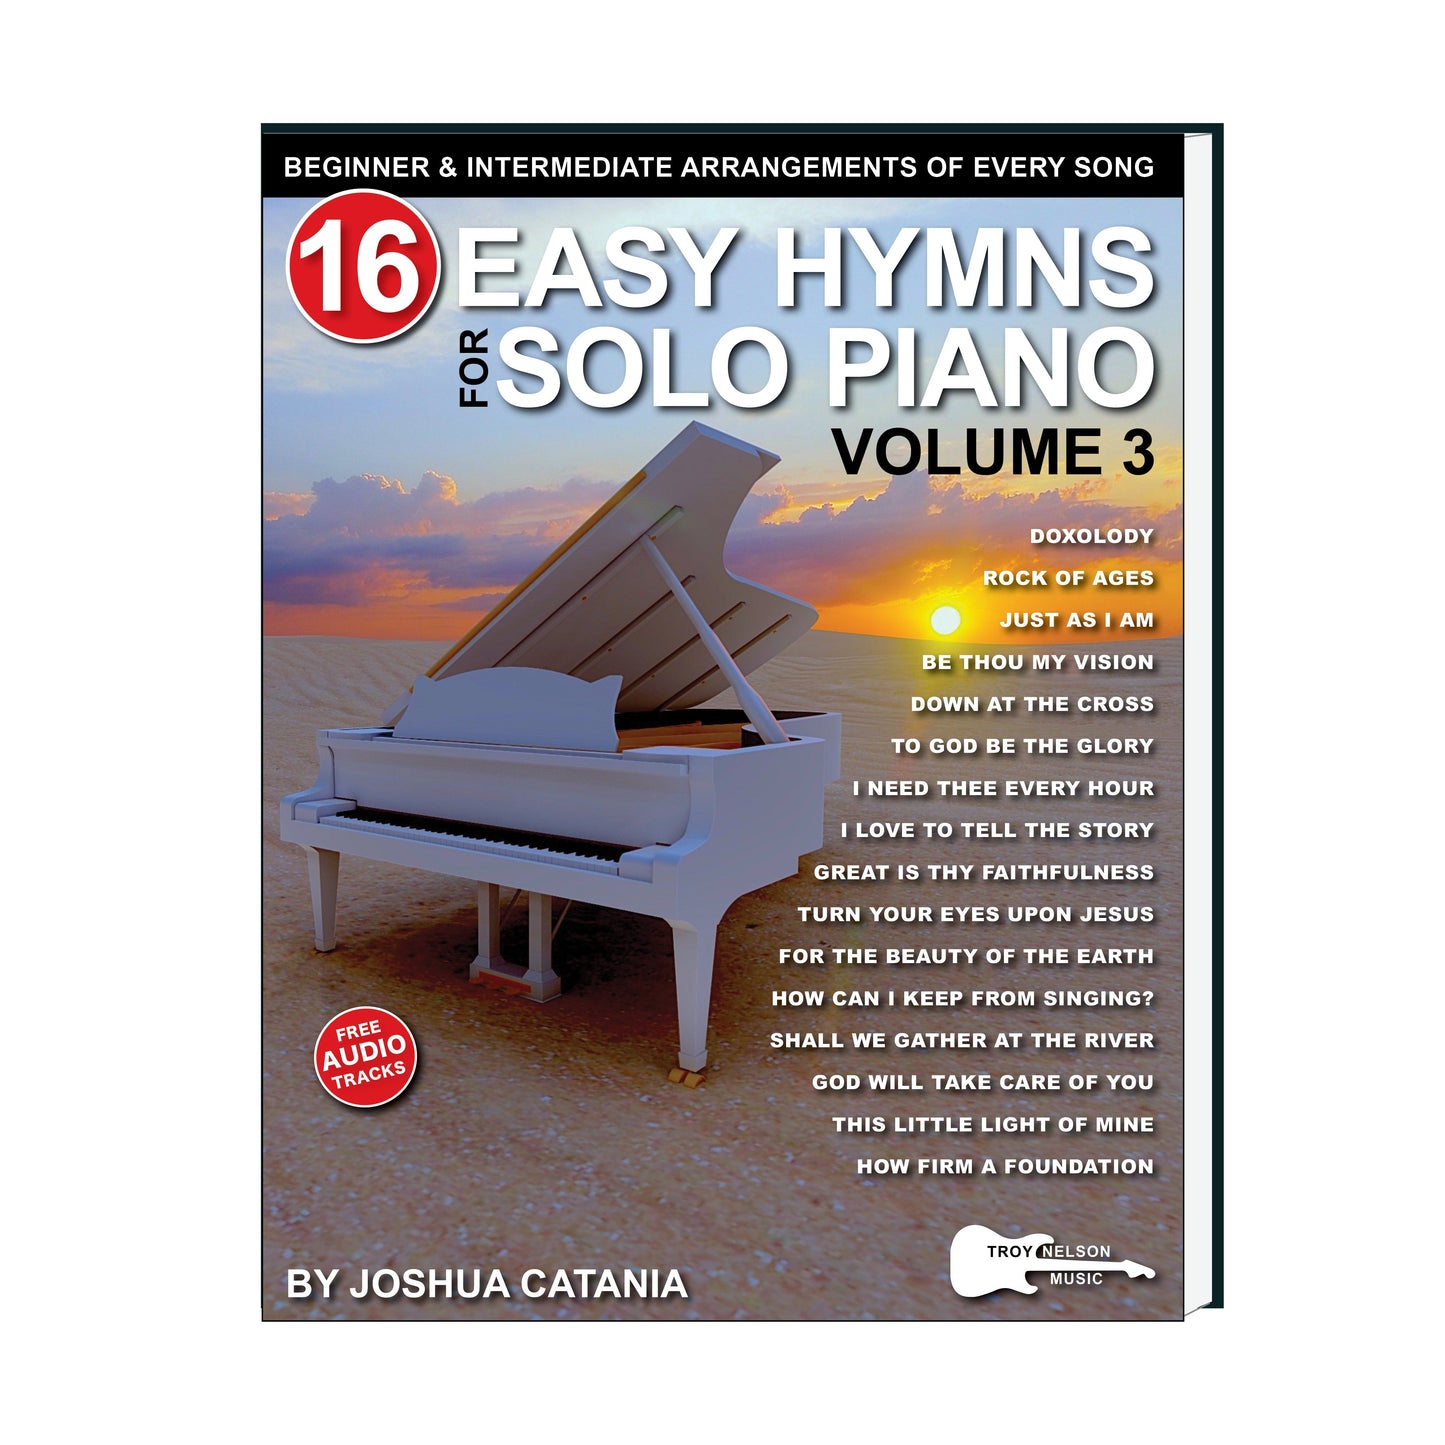 piano hymn volume 3 book cover with piano image